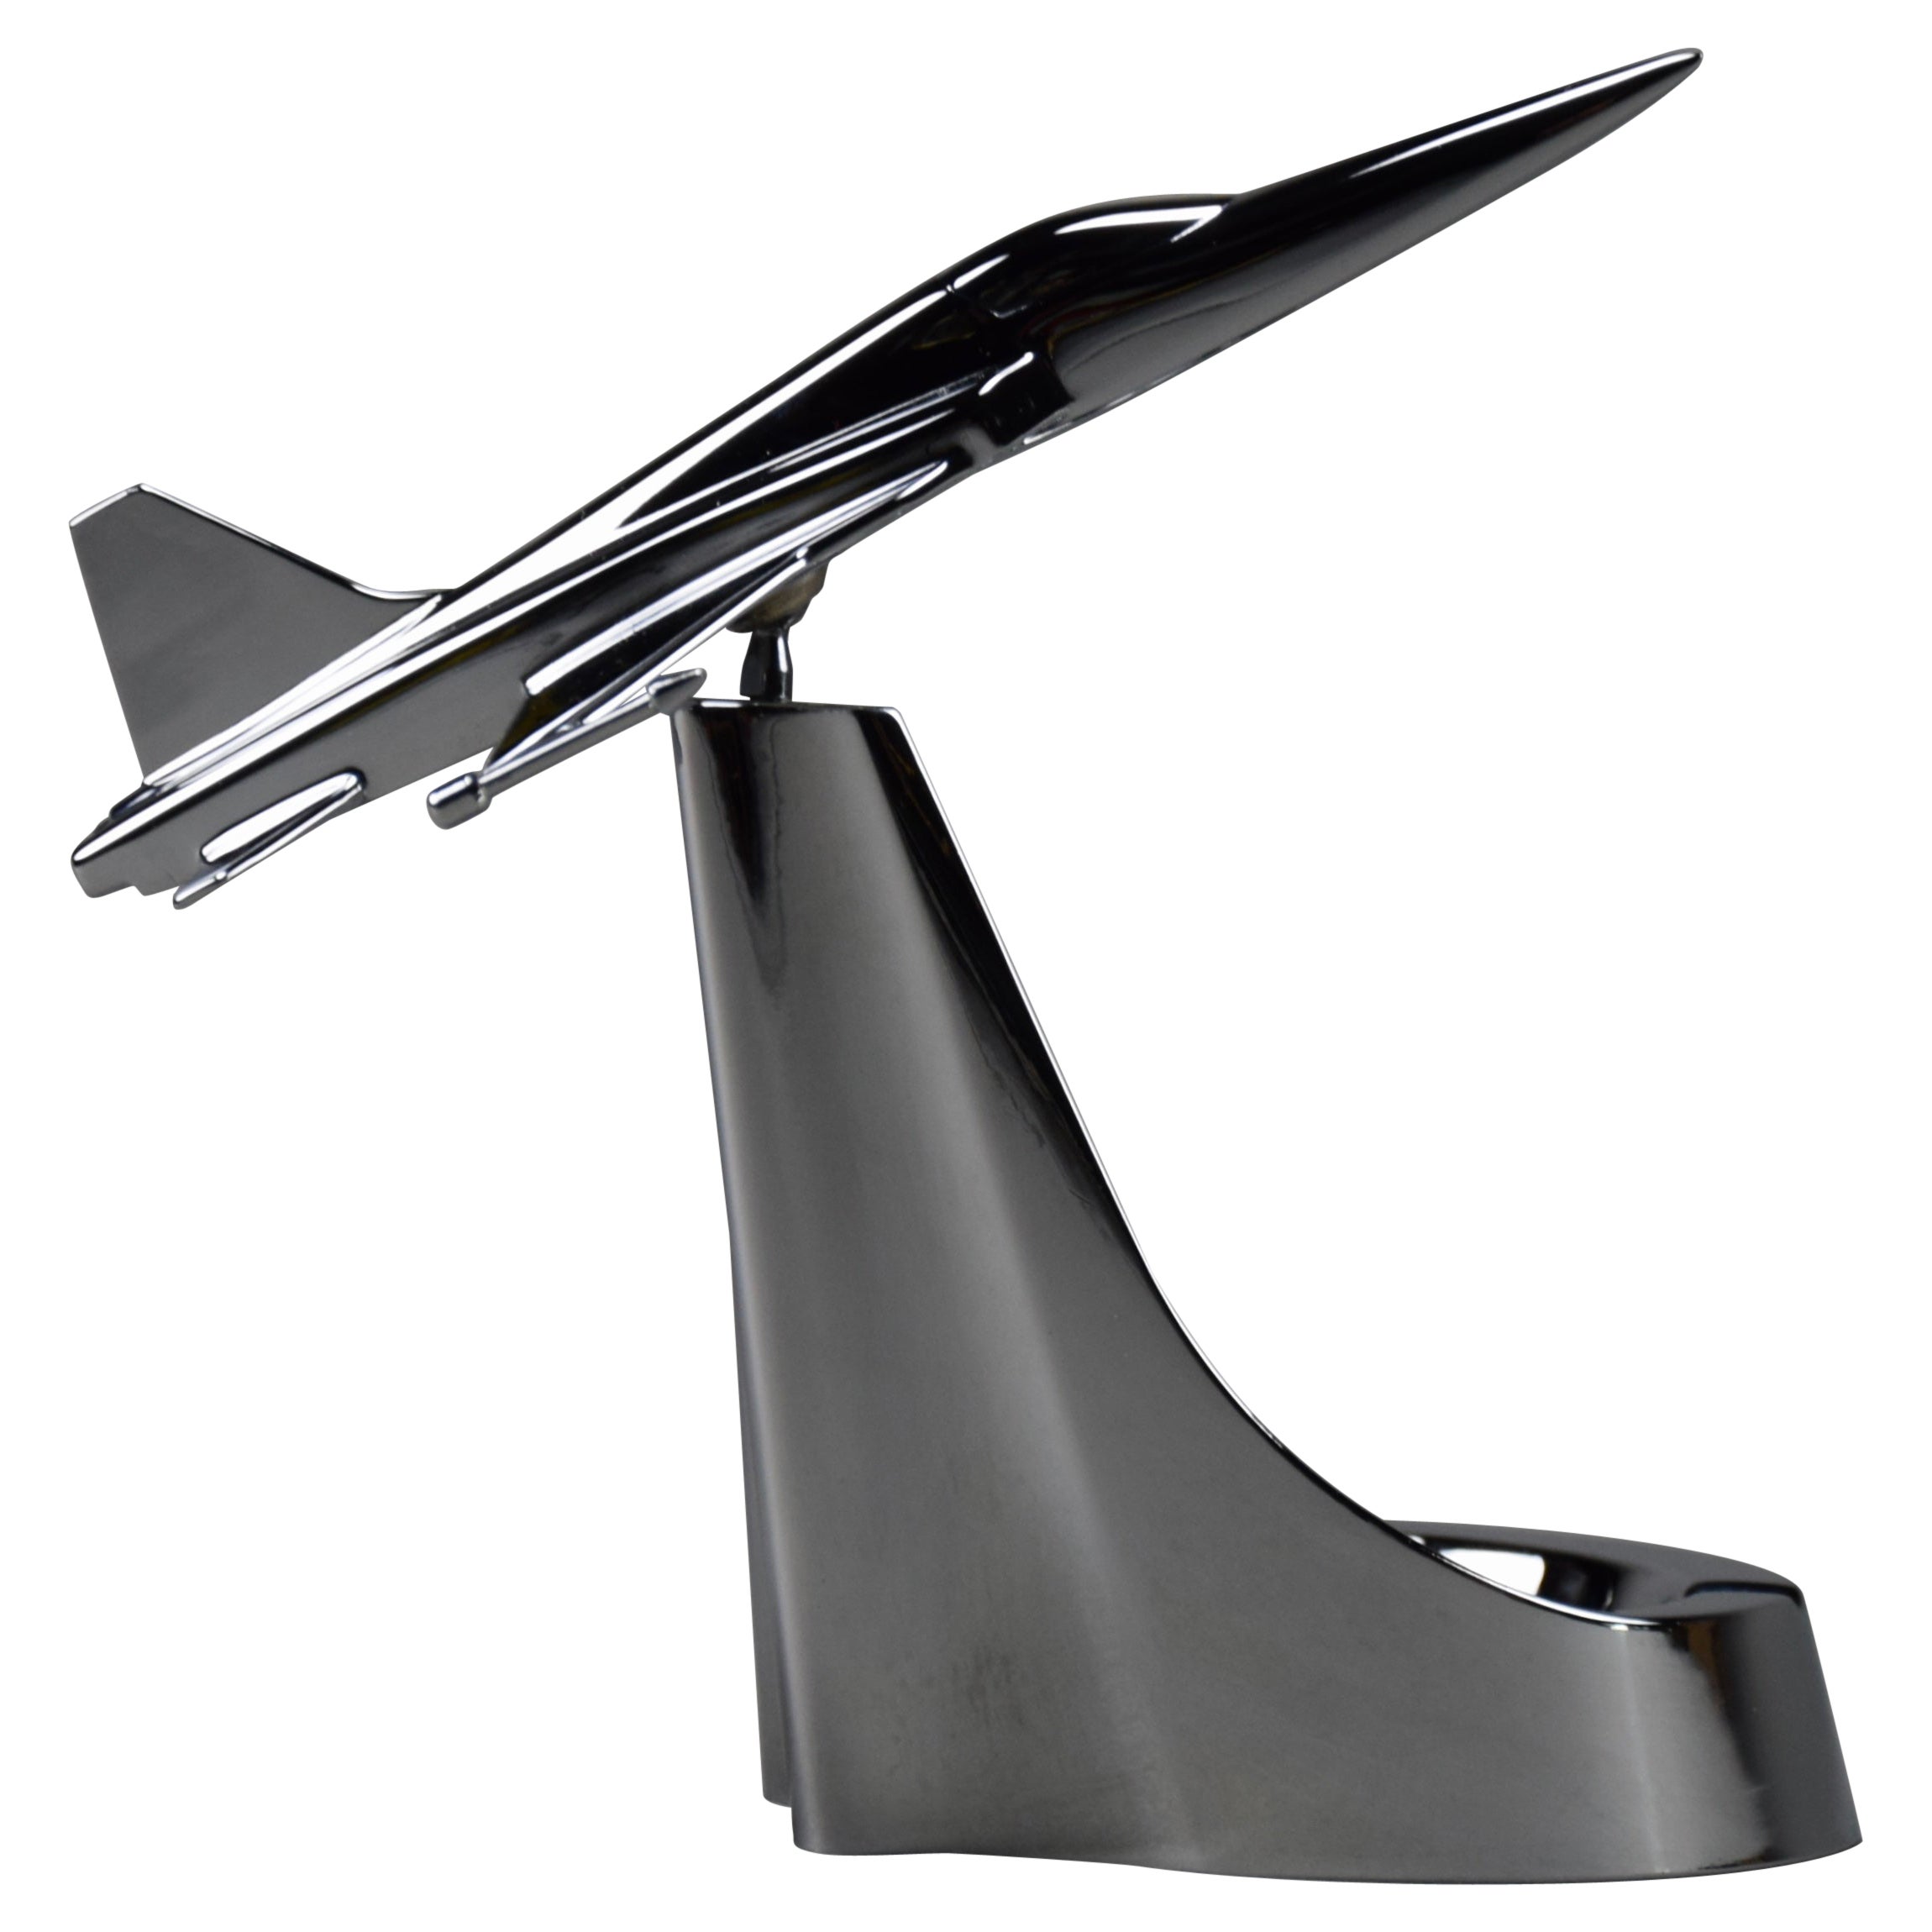 Northtrop F-5 Supersonic Fighter Aircraft Promotional Ashtray